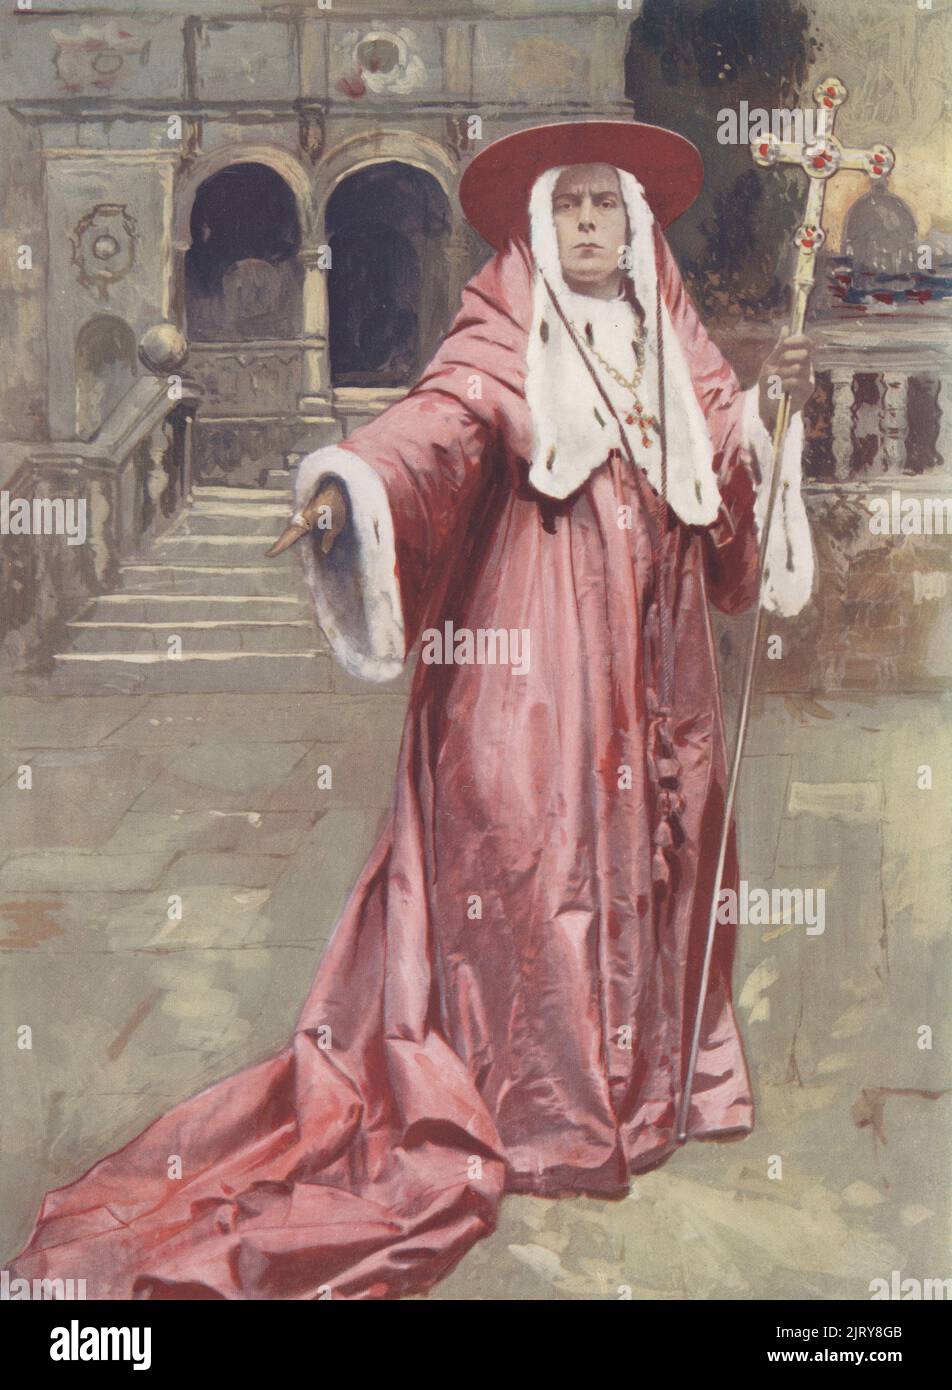 E.S. Willard as Cardinal de' Medici in The Cardinal, a historical play by Louis N. Parker at the St. James Theatre, London, 1903. Edward Smith Willard, British stage actor,  1853-1915. Colour printing of a hand-coloured illustration based on a monochrome photograph from George Newnes’s Players of the Day, London, 1905. Stock Photo